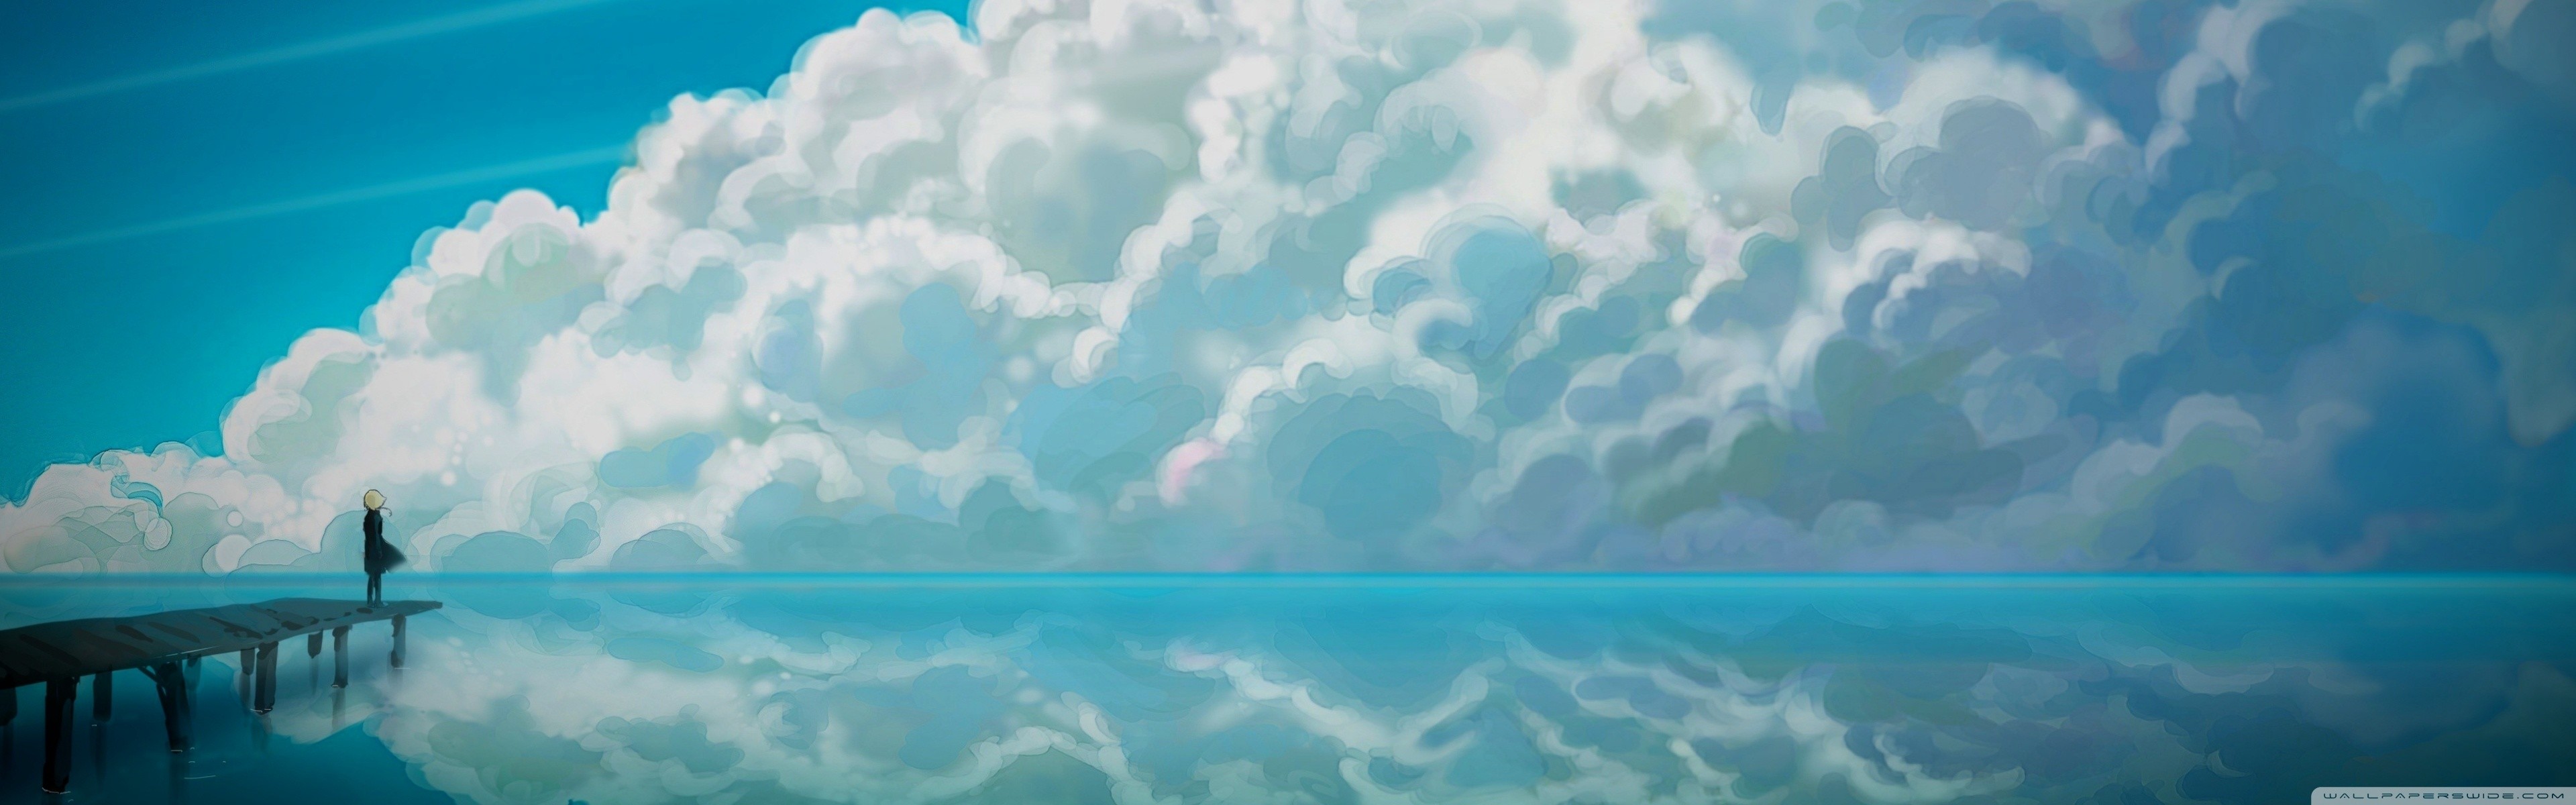 3840x1200 Background for Anime Dual Monitor  px